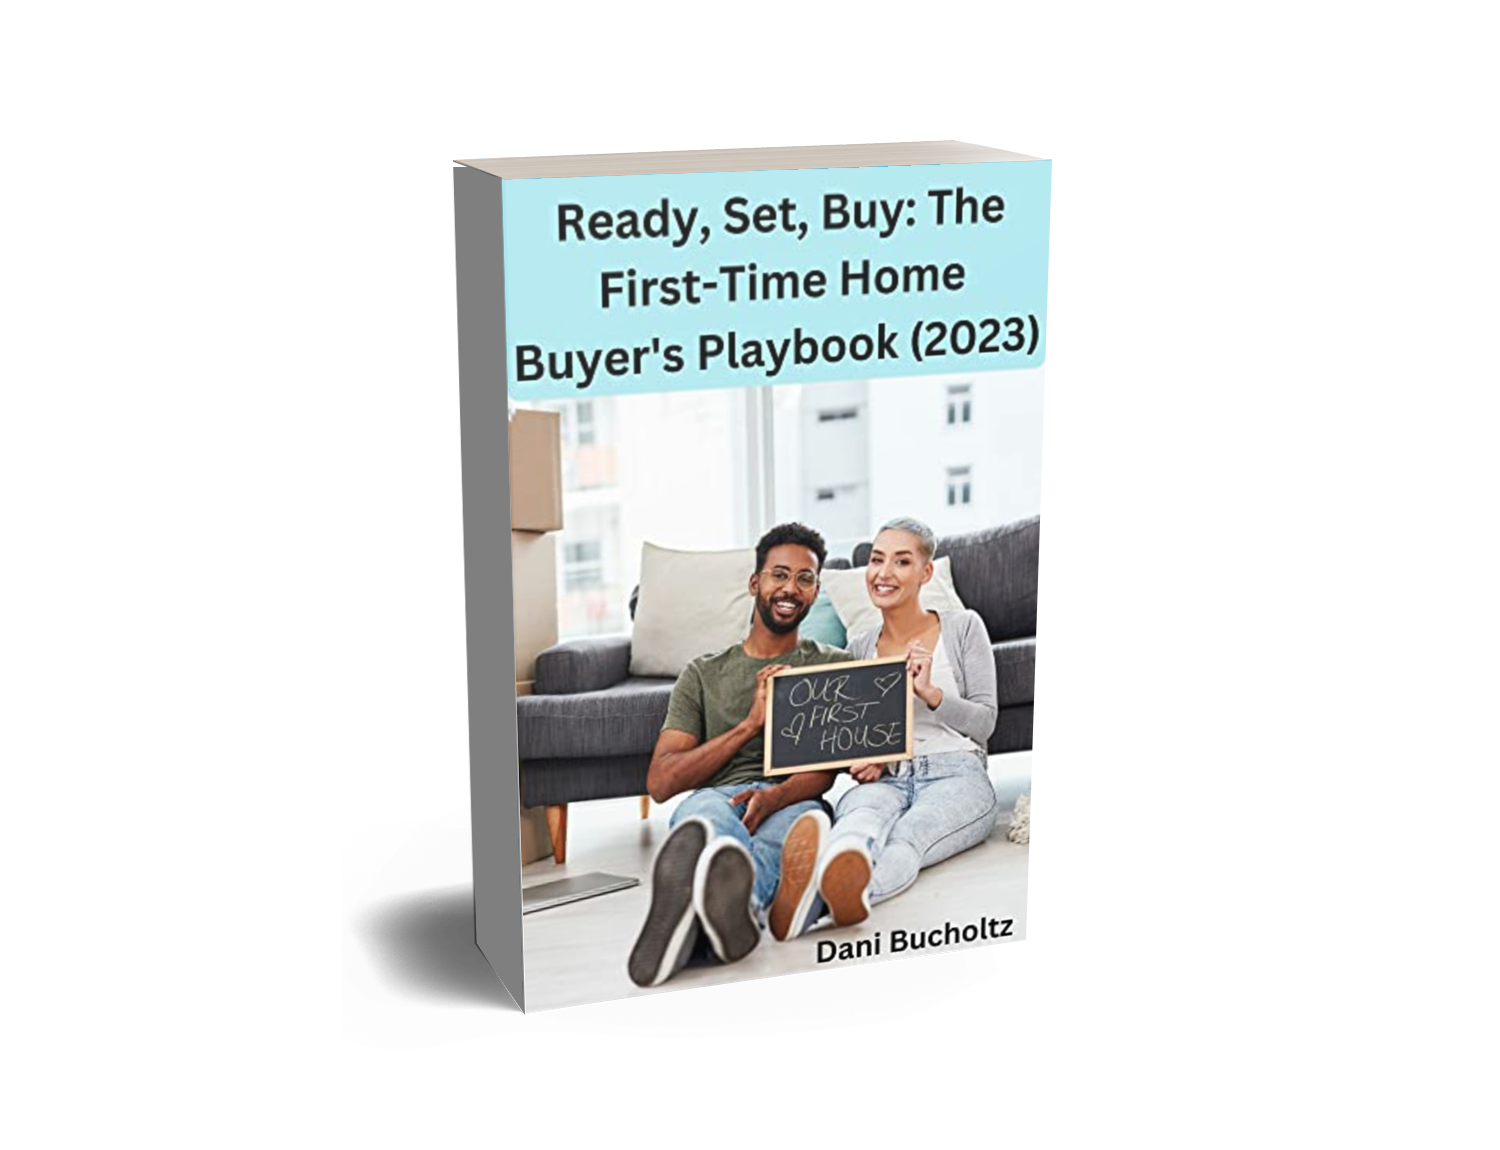 Ready, Set, Buy: The First-Time Home Buyer's Playbook